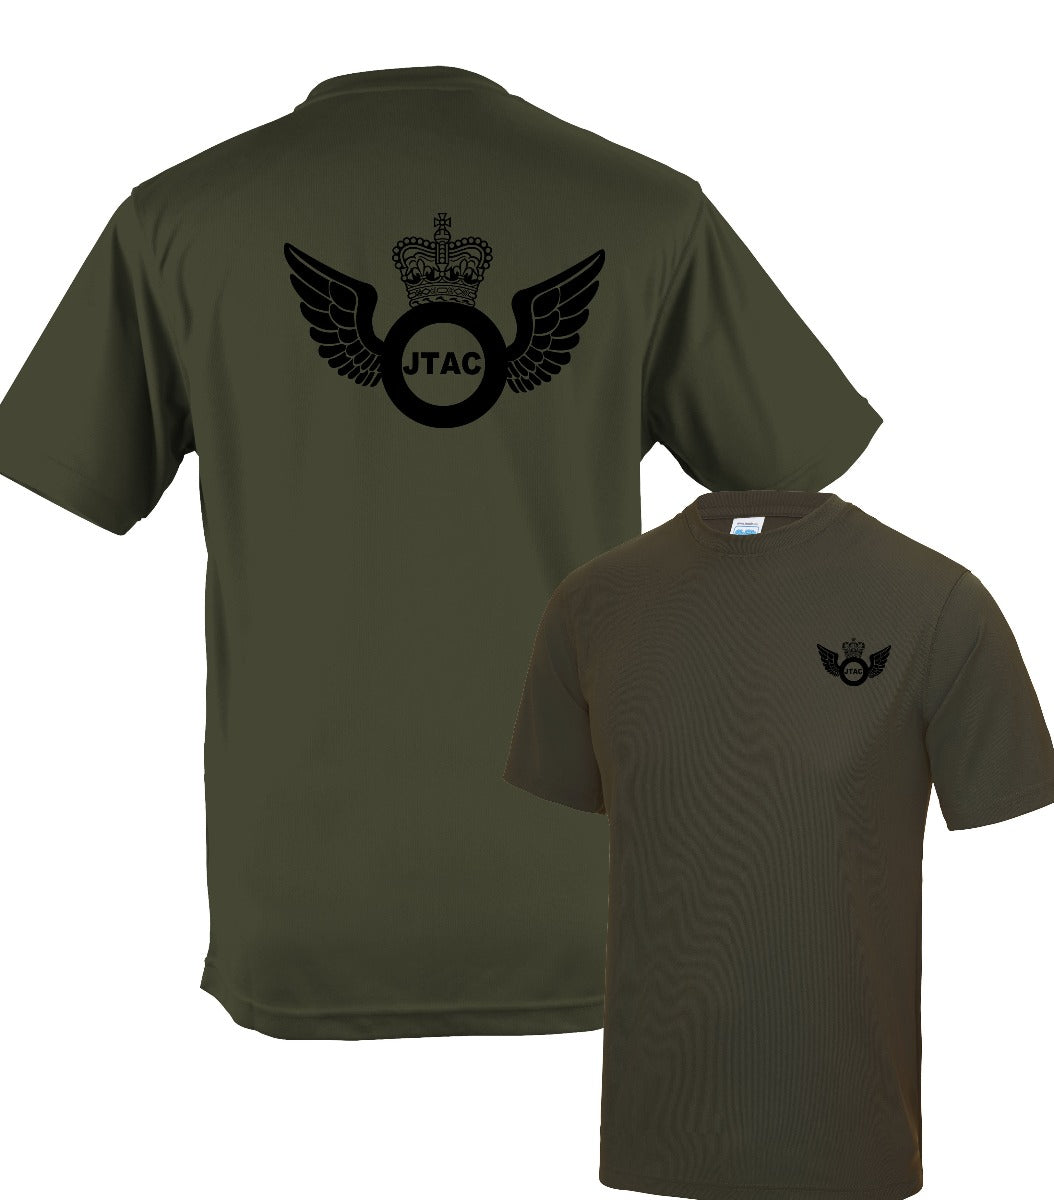 Double Printed JTAC Wicking T-Shirt